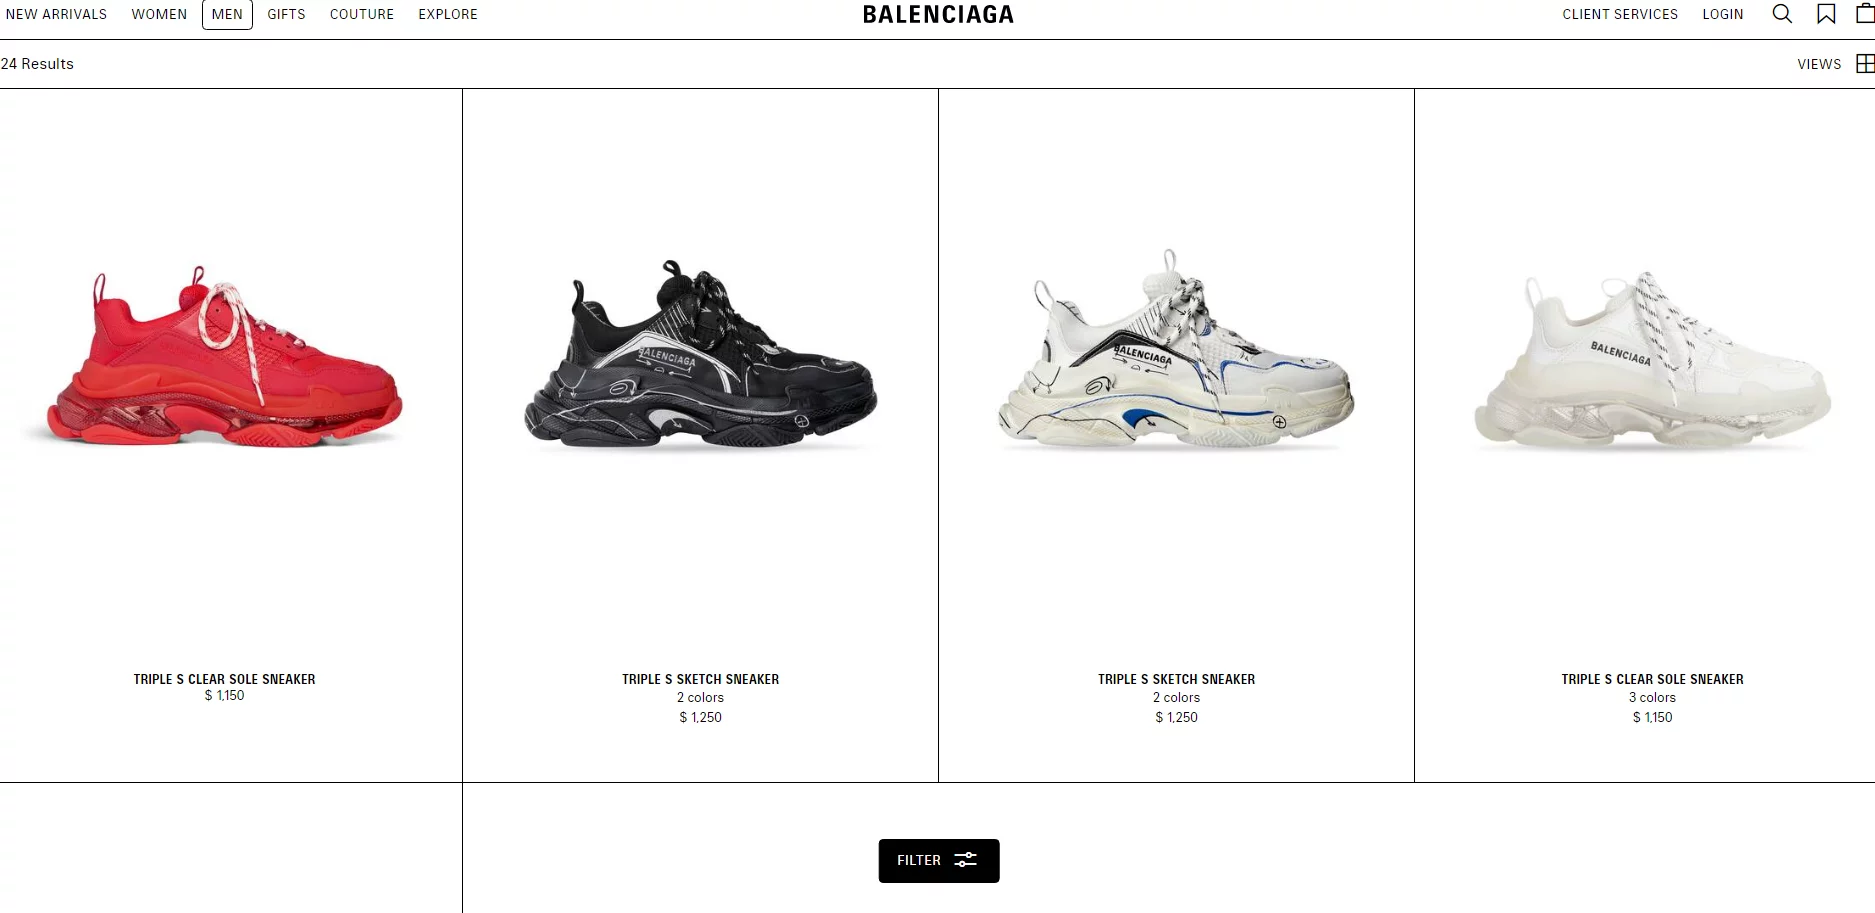 Balenciaga Triple S Sneakers: Chunky silhouette and high-fashion appeal